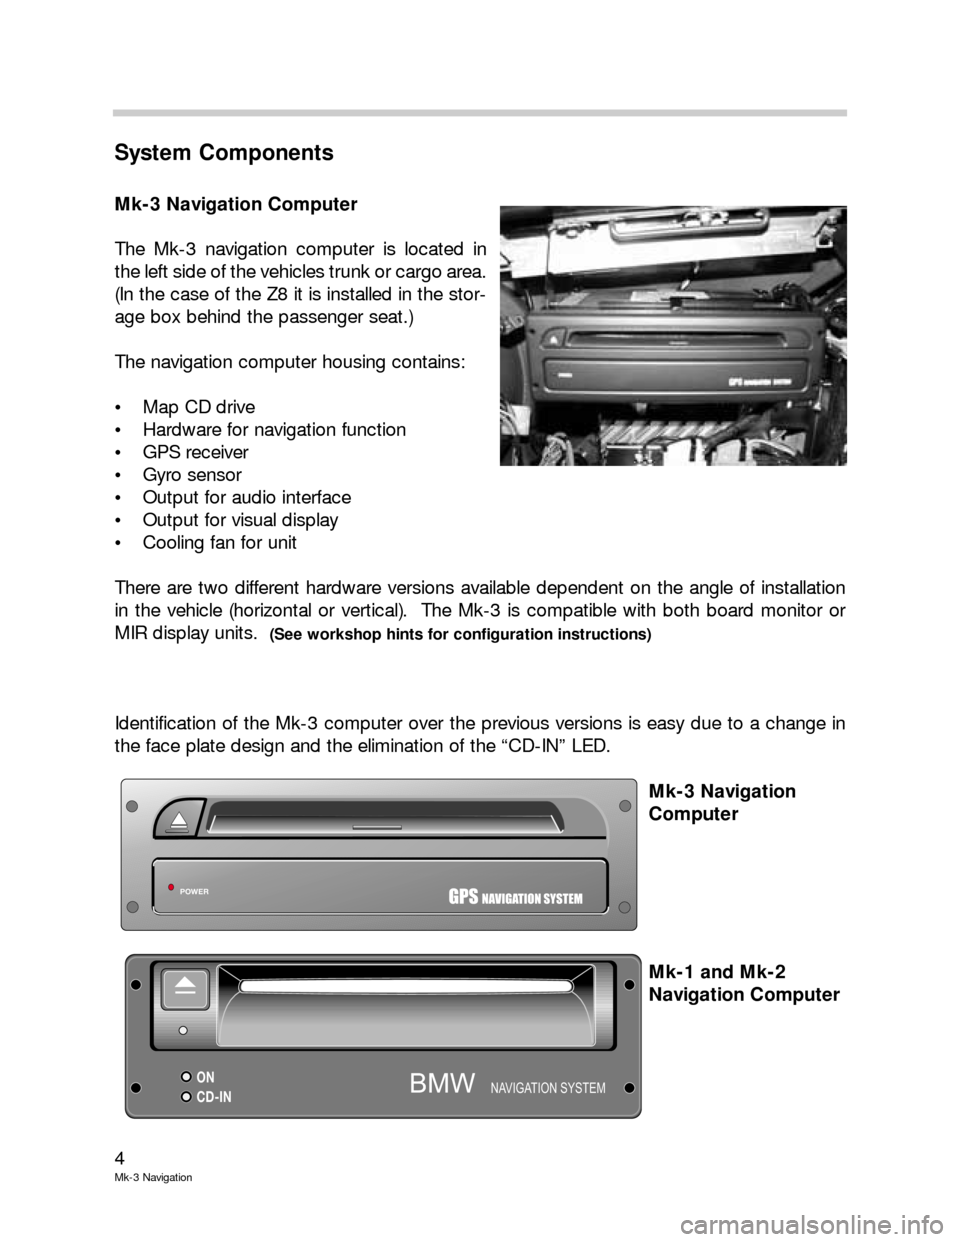 BMW 5 SERIES 2001 E39 Mk3 Navigation System Manual 4
Mk-3 Navigation
System Components
Mk-3 Navigation Computer
The Mk-3 navigation computer is located in
the left side of the vehicles trunk or cargo area.
(In the case of the Z8 it is installed in the